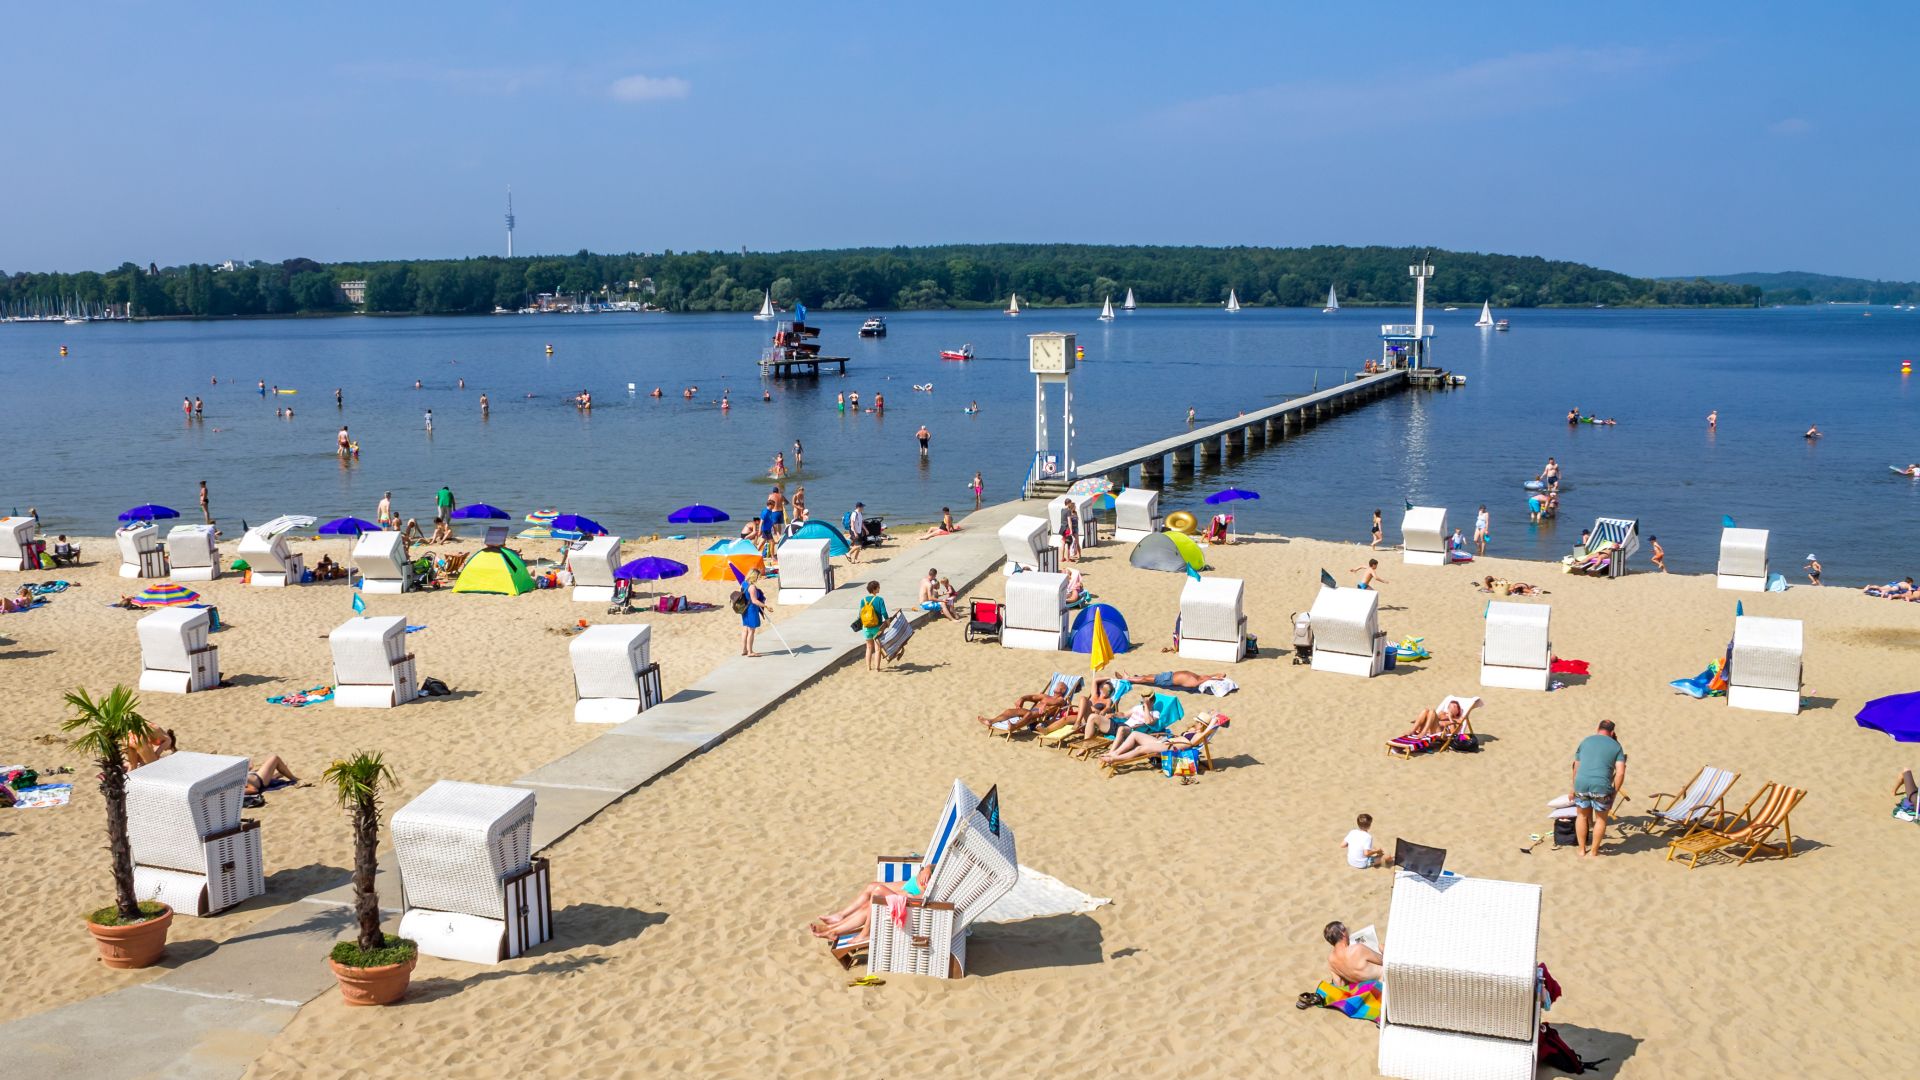 Berlin: Lido on the Great Wannsee